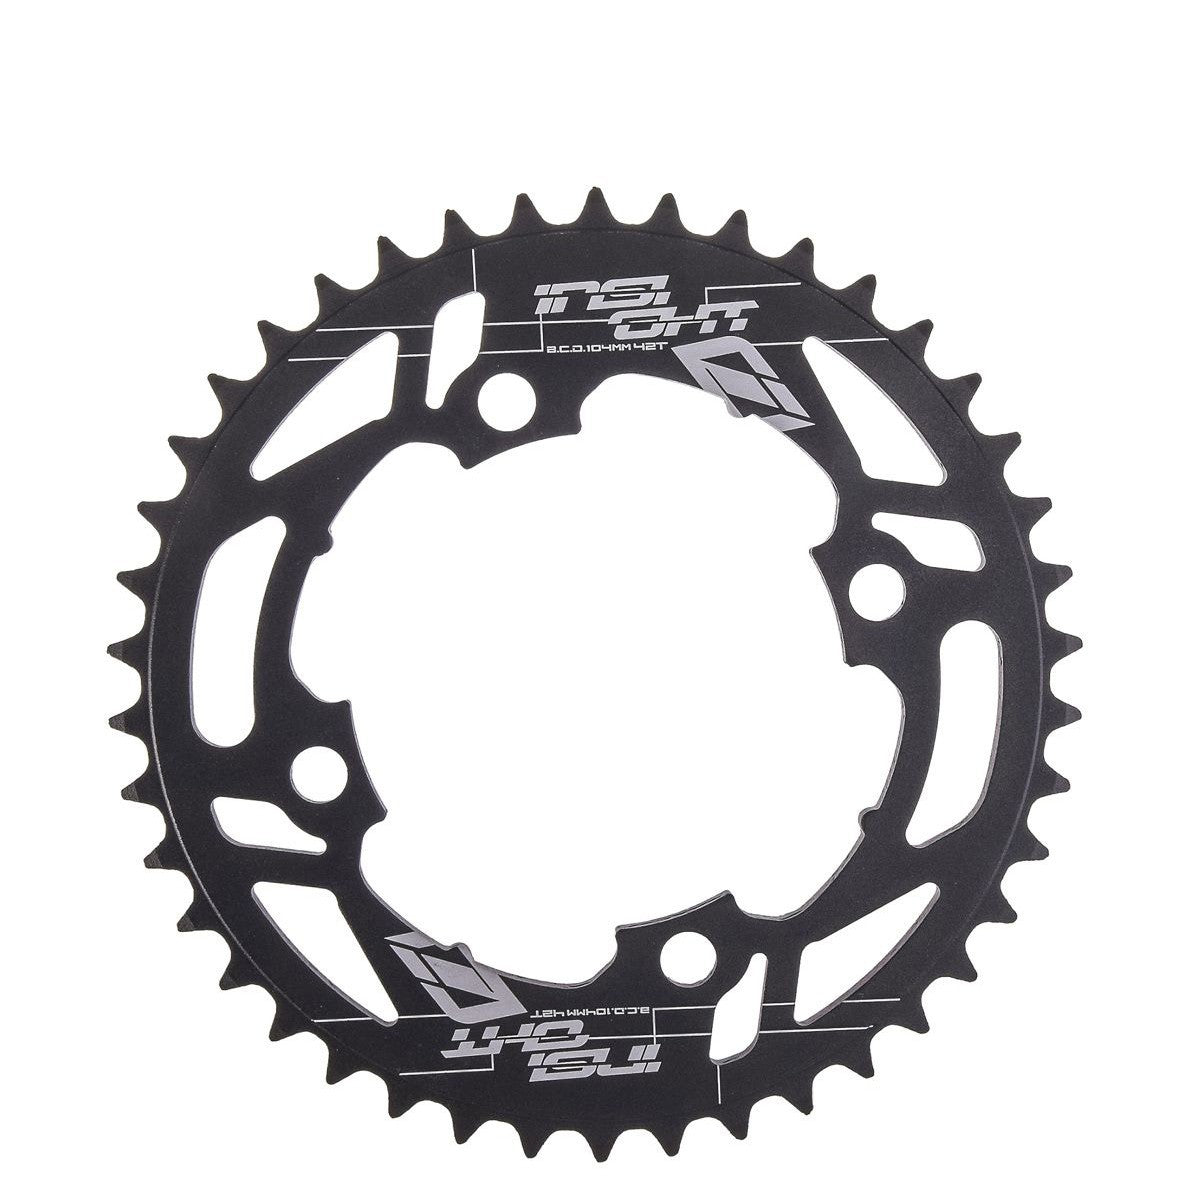 Insight 4 Bolt 104mm Chainring In Black - Downtown Bicycle Works 